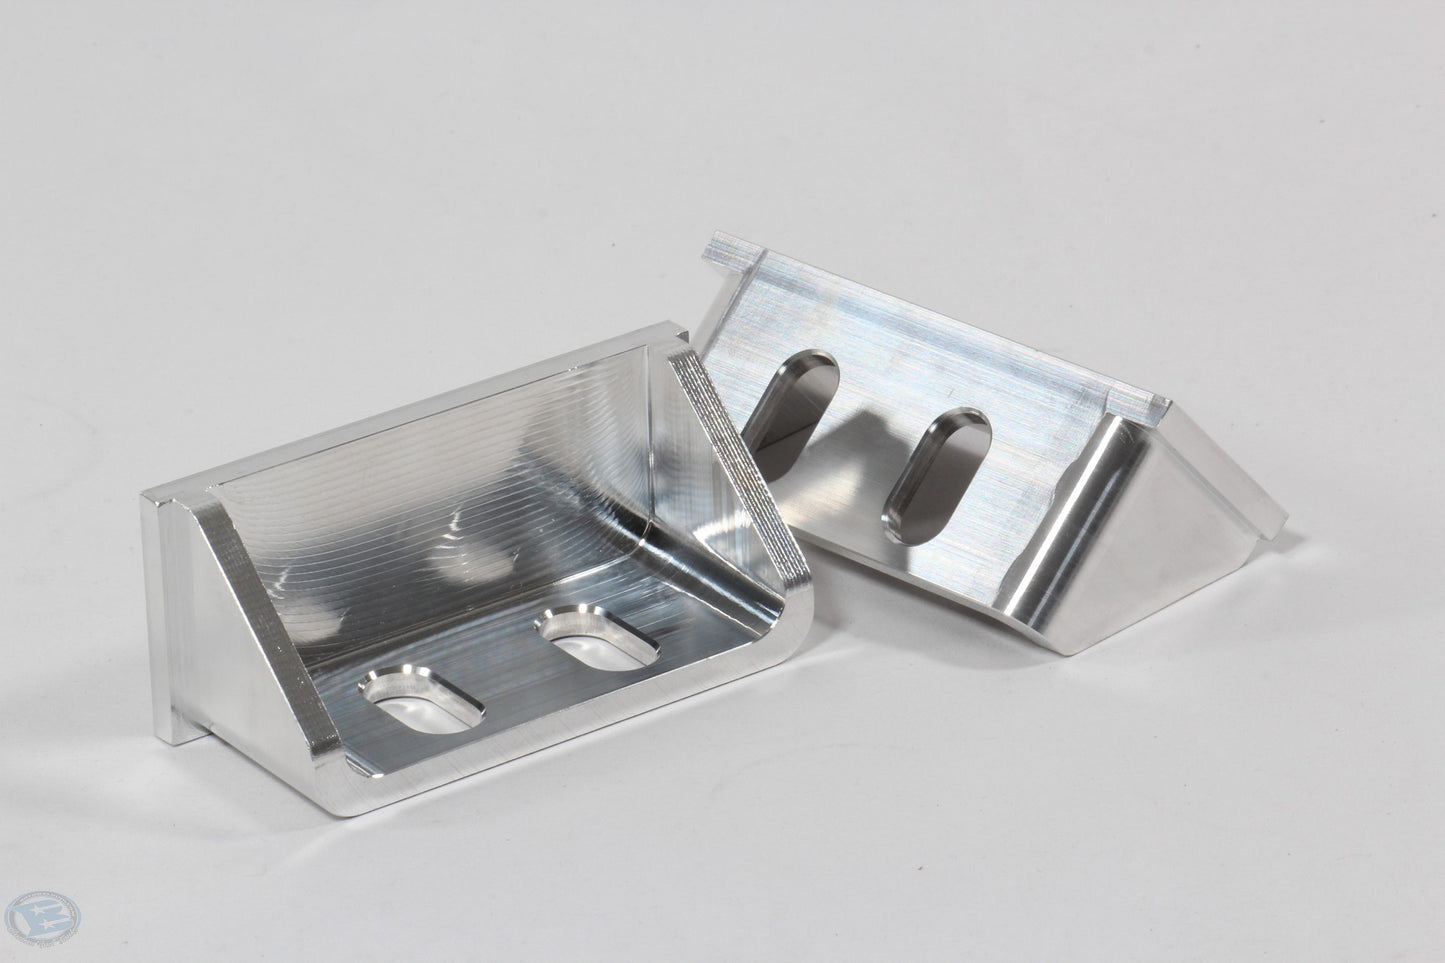 Billet 2x2 4inch long Mounting Tabs  4Pack